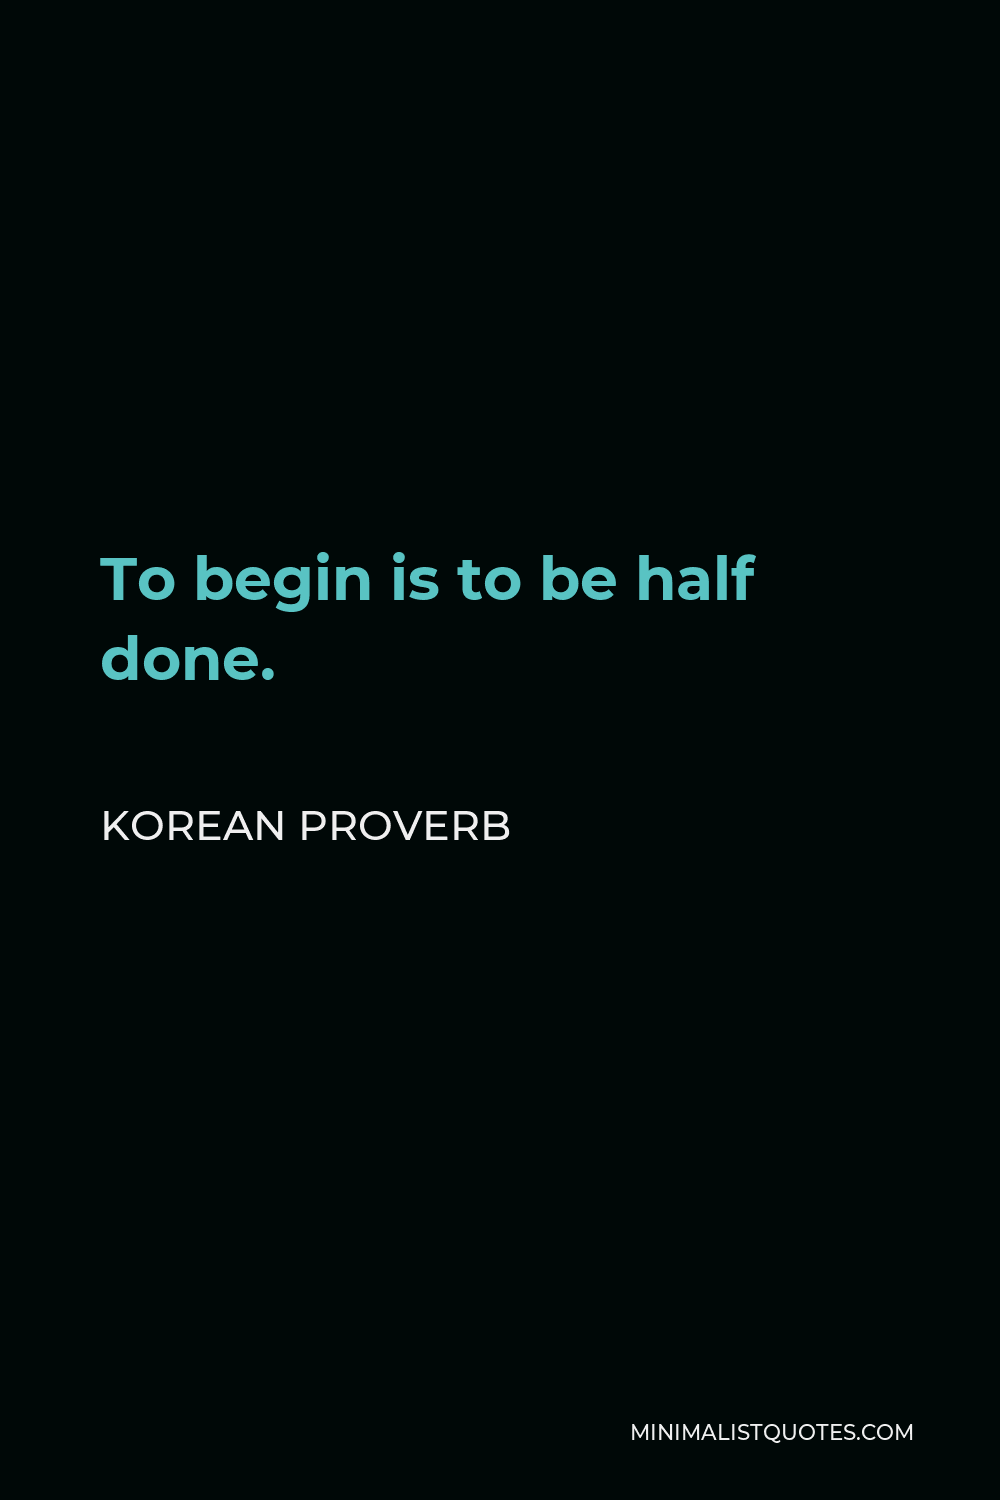 Korean Proverb Quote - To begin is to be half done.